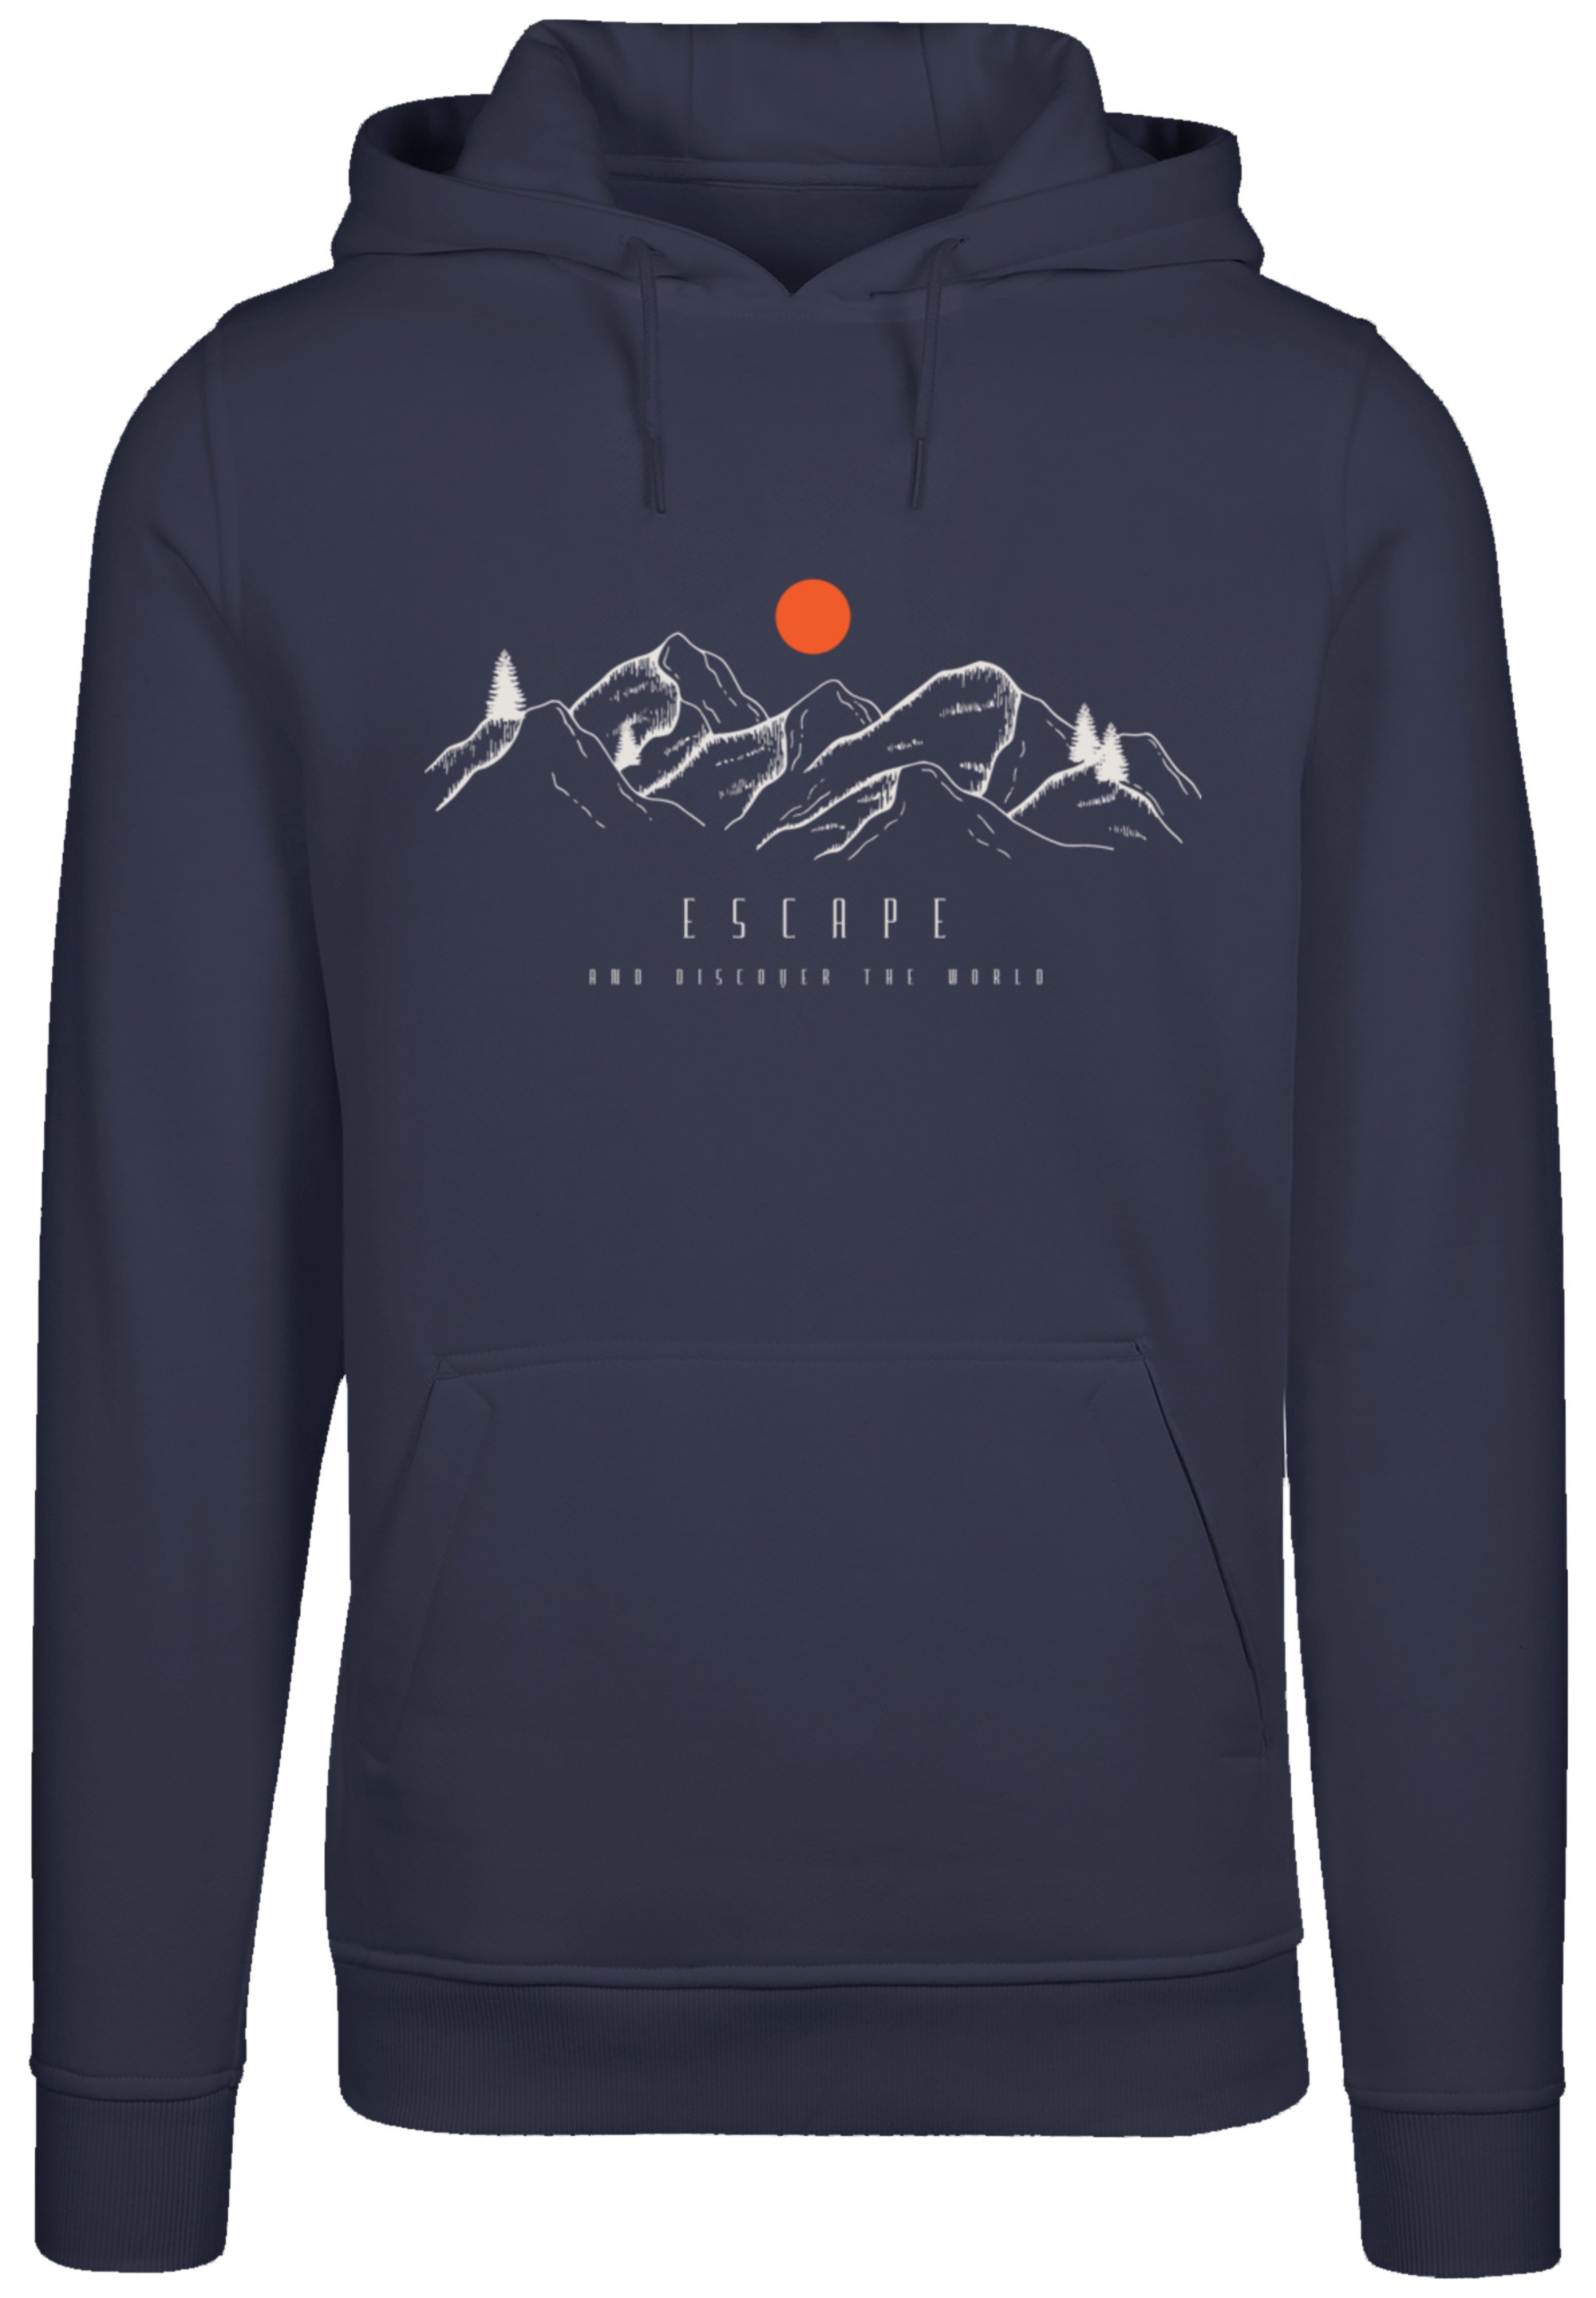 F4NT4STIC Kapuzenpullover »Discover the world«, Hoodie, Warm, Bequem